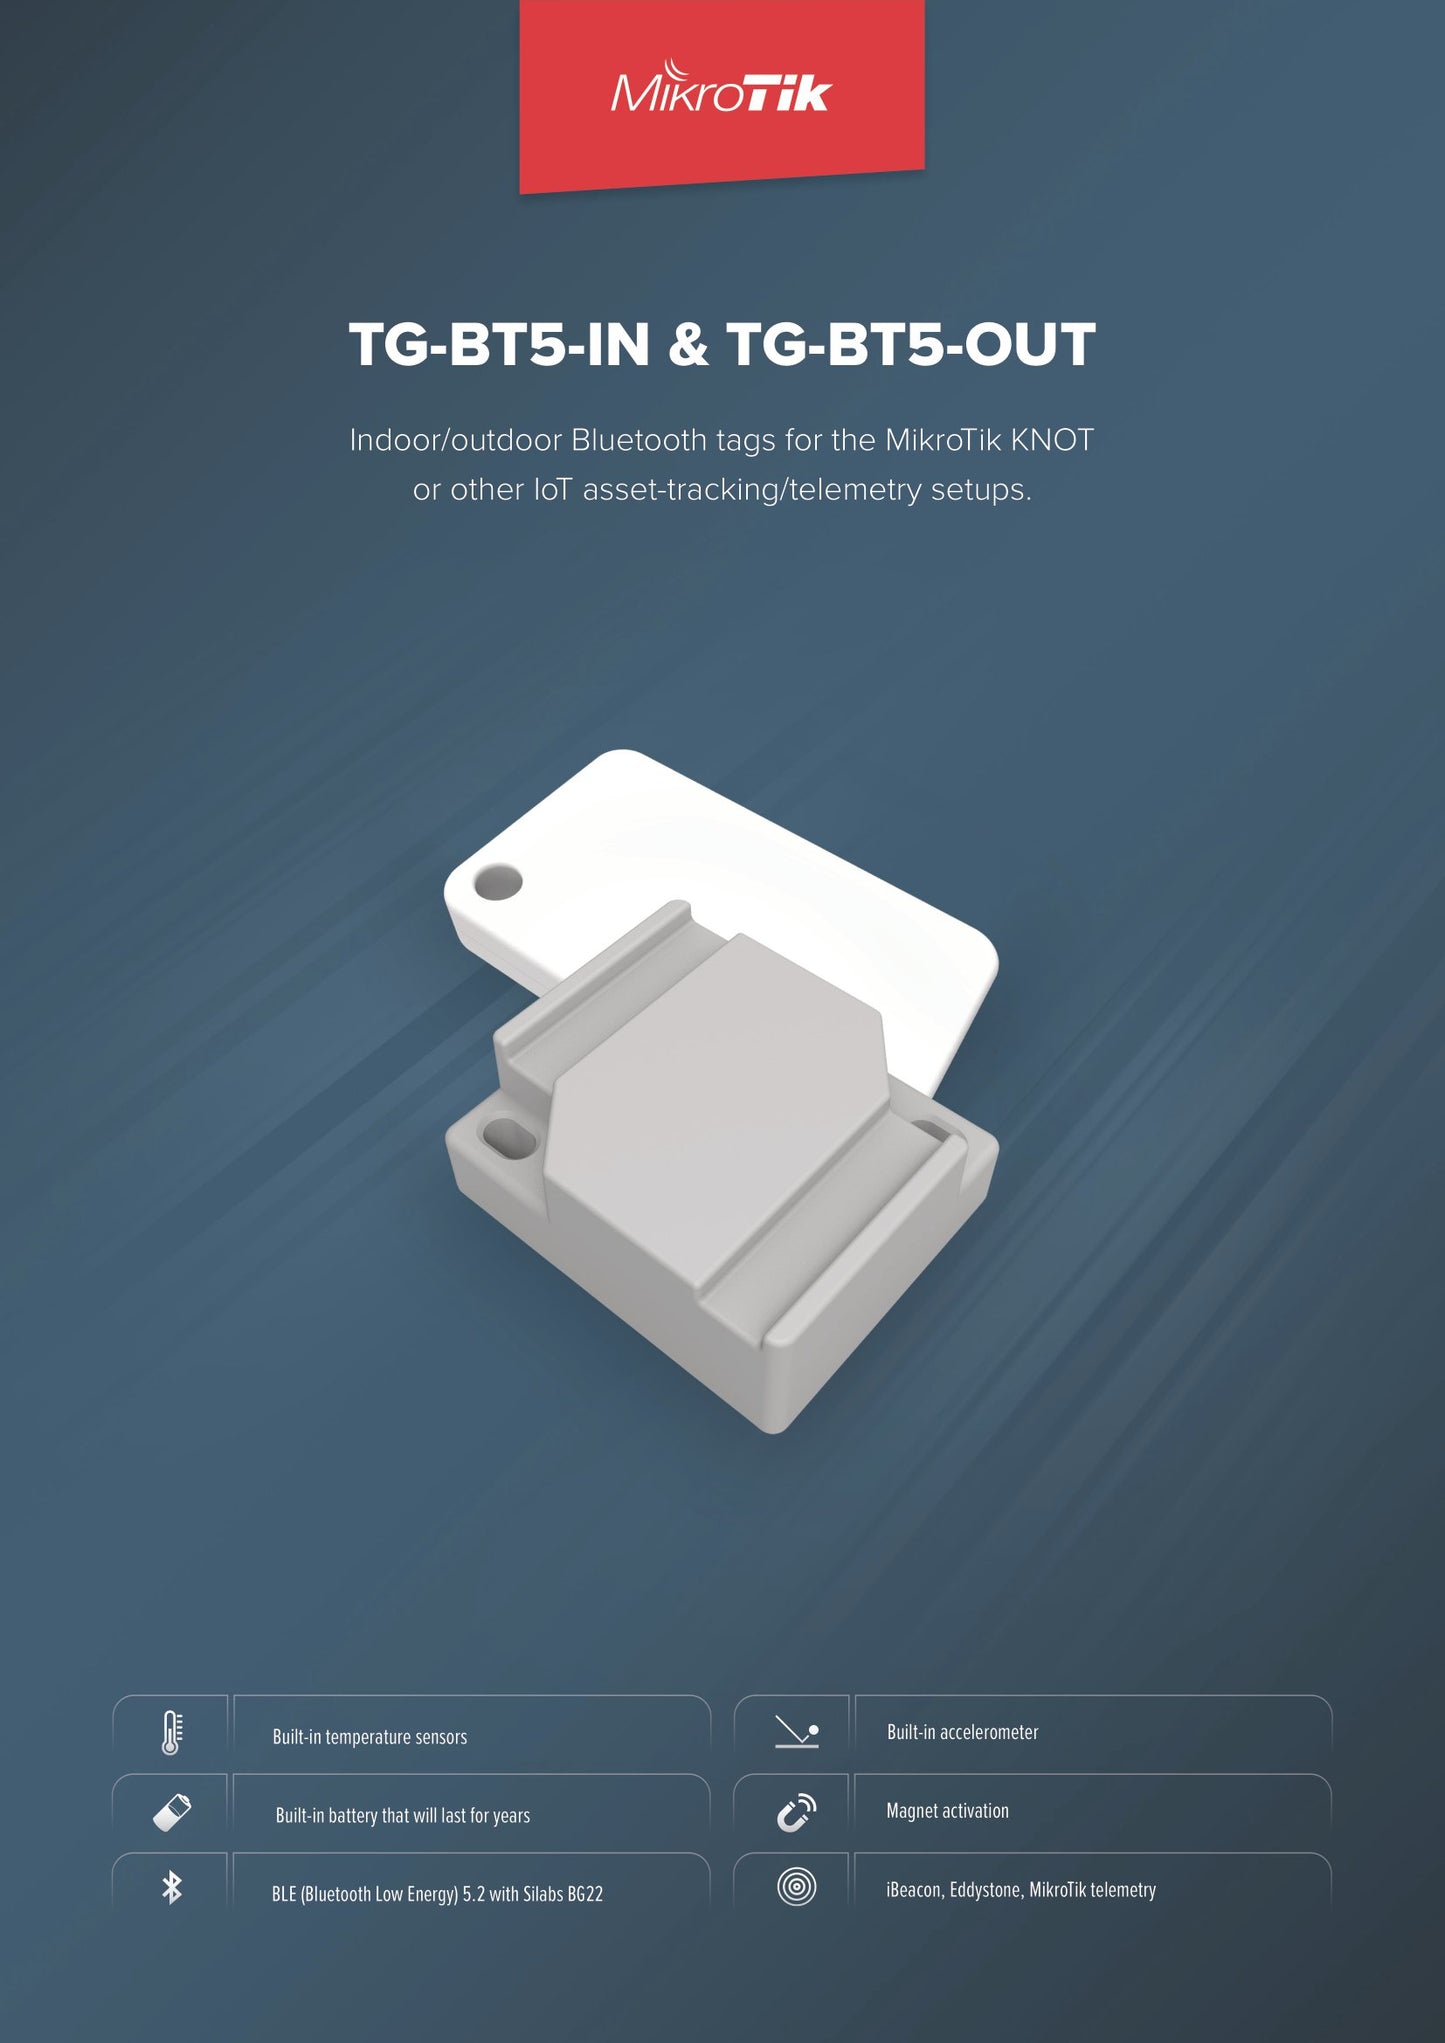 MikroTik Outdoor IoT Bluetooth Tag | TG-BT5-OUT